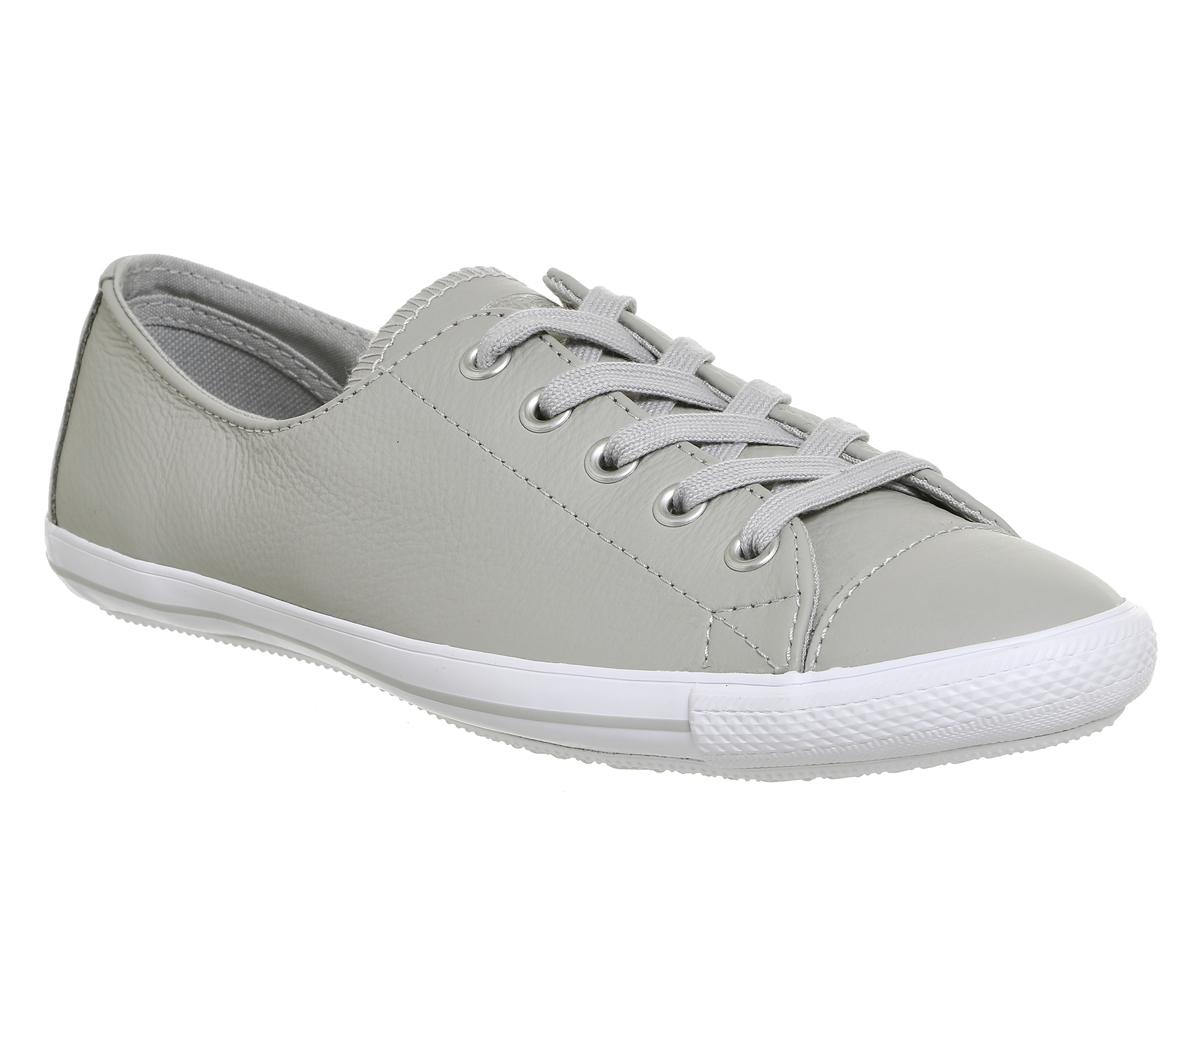 Converse Ct Lite 2 Trainers Ash Grey Leather Exclusive - Hers trainers